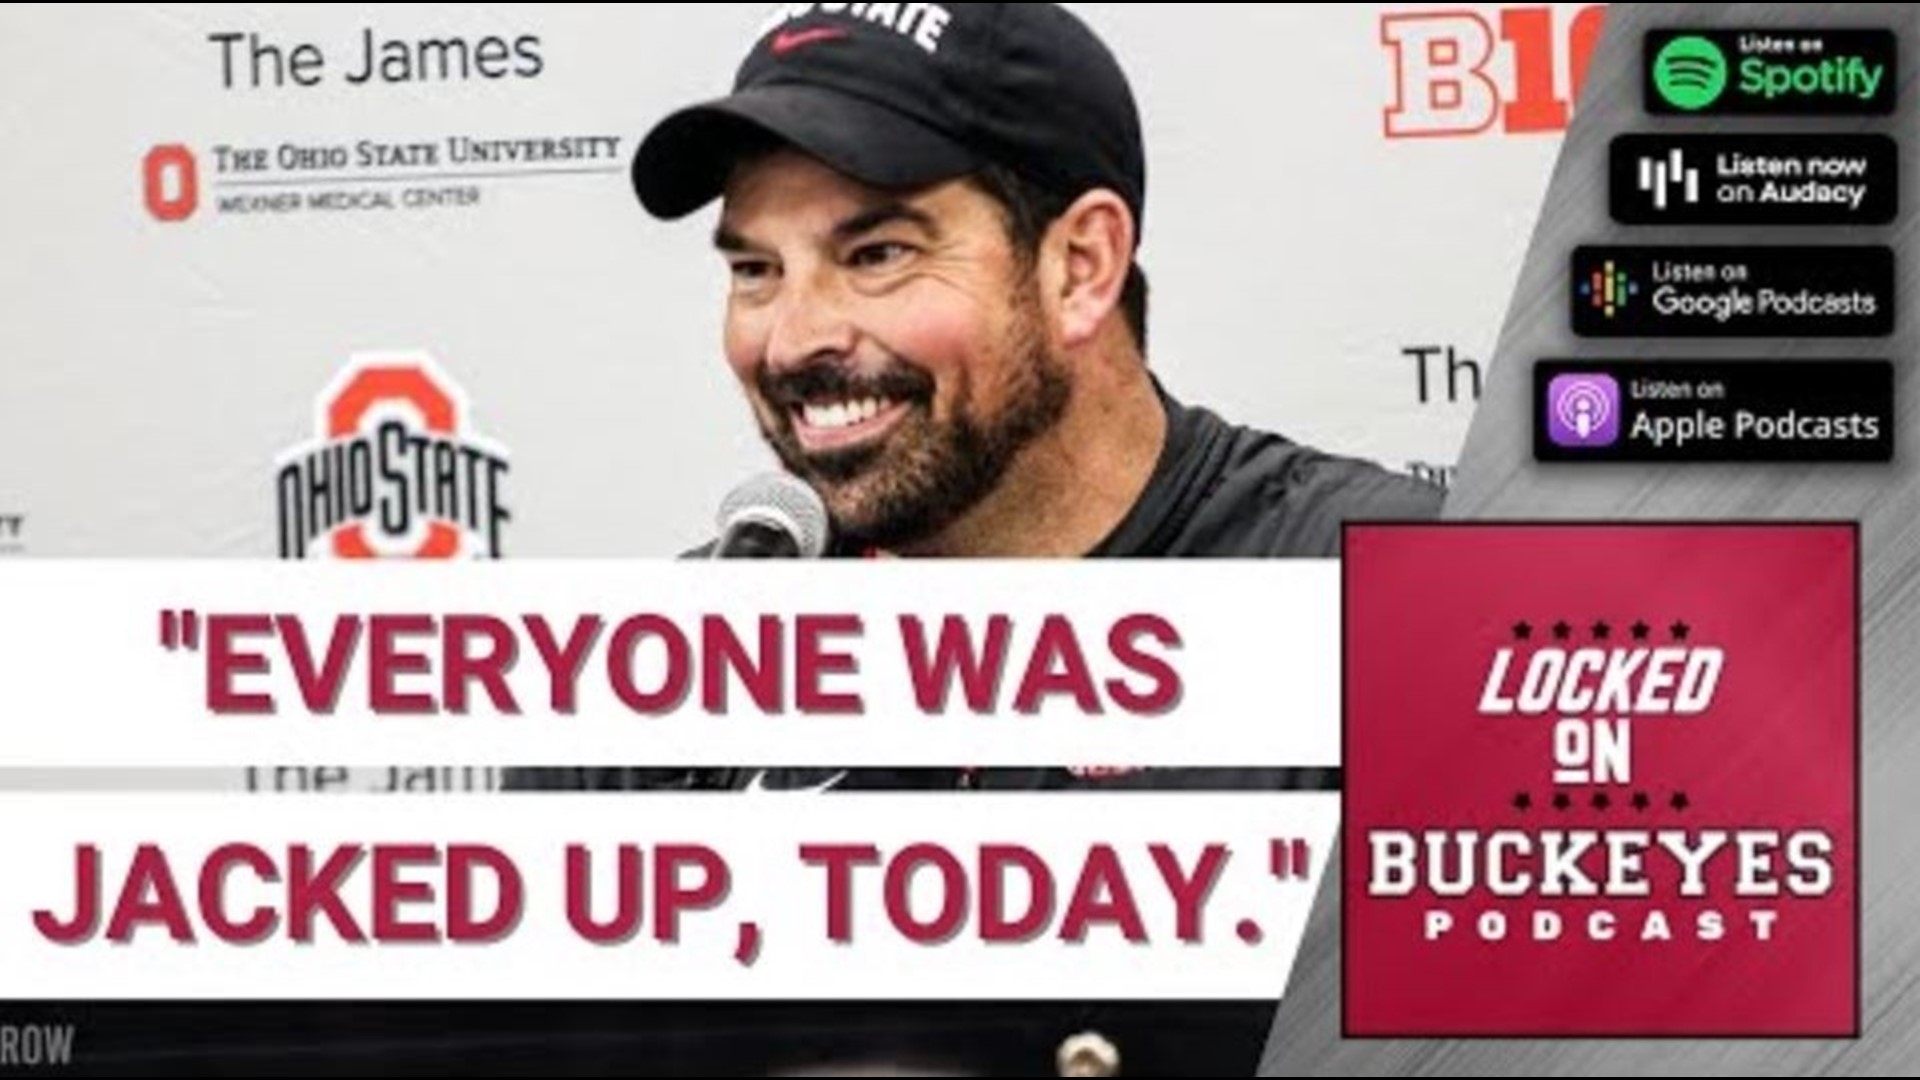 Are you ready for some Ohio State football? In this edition of the Locked On Buckeyes podcast we review the team’s first fall camp practice.